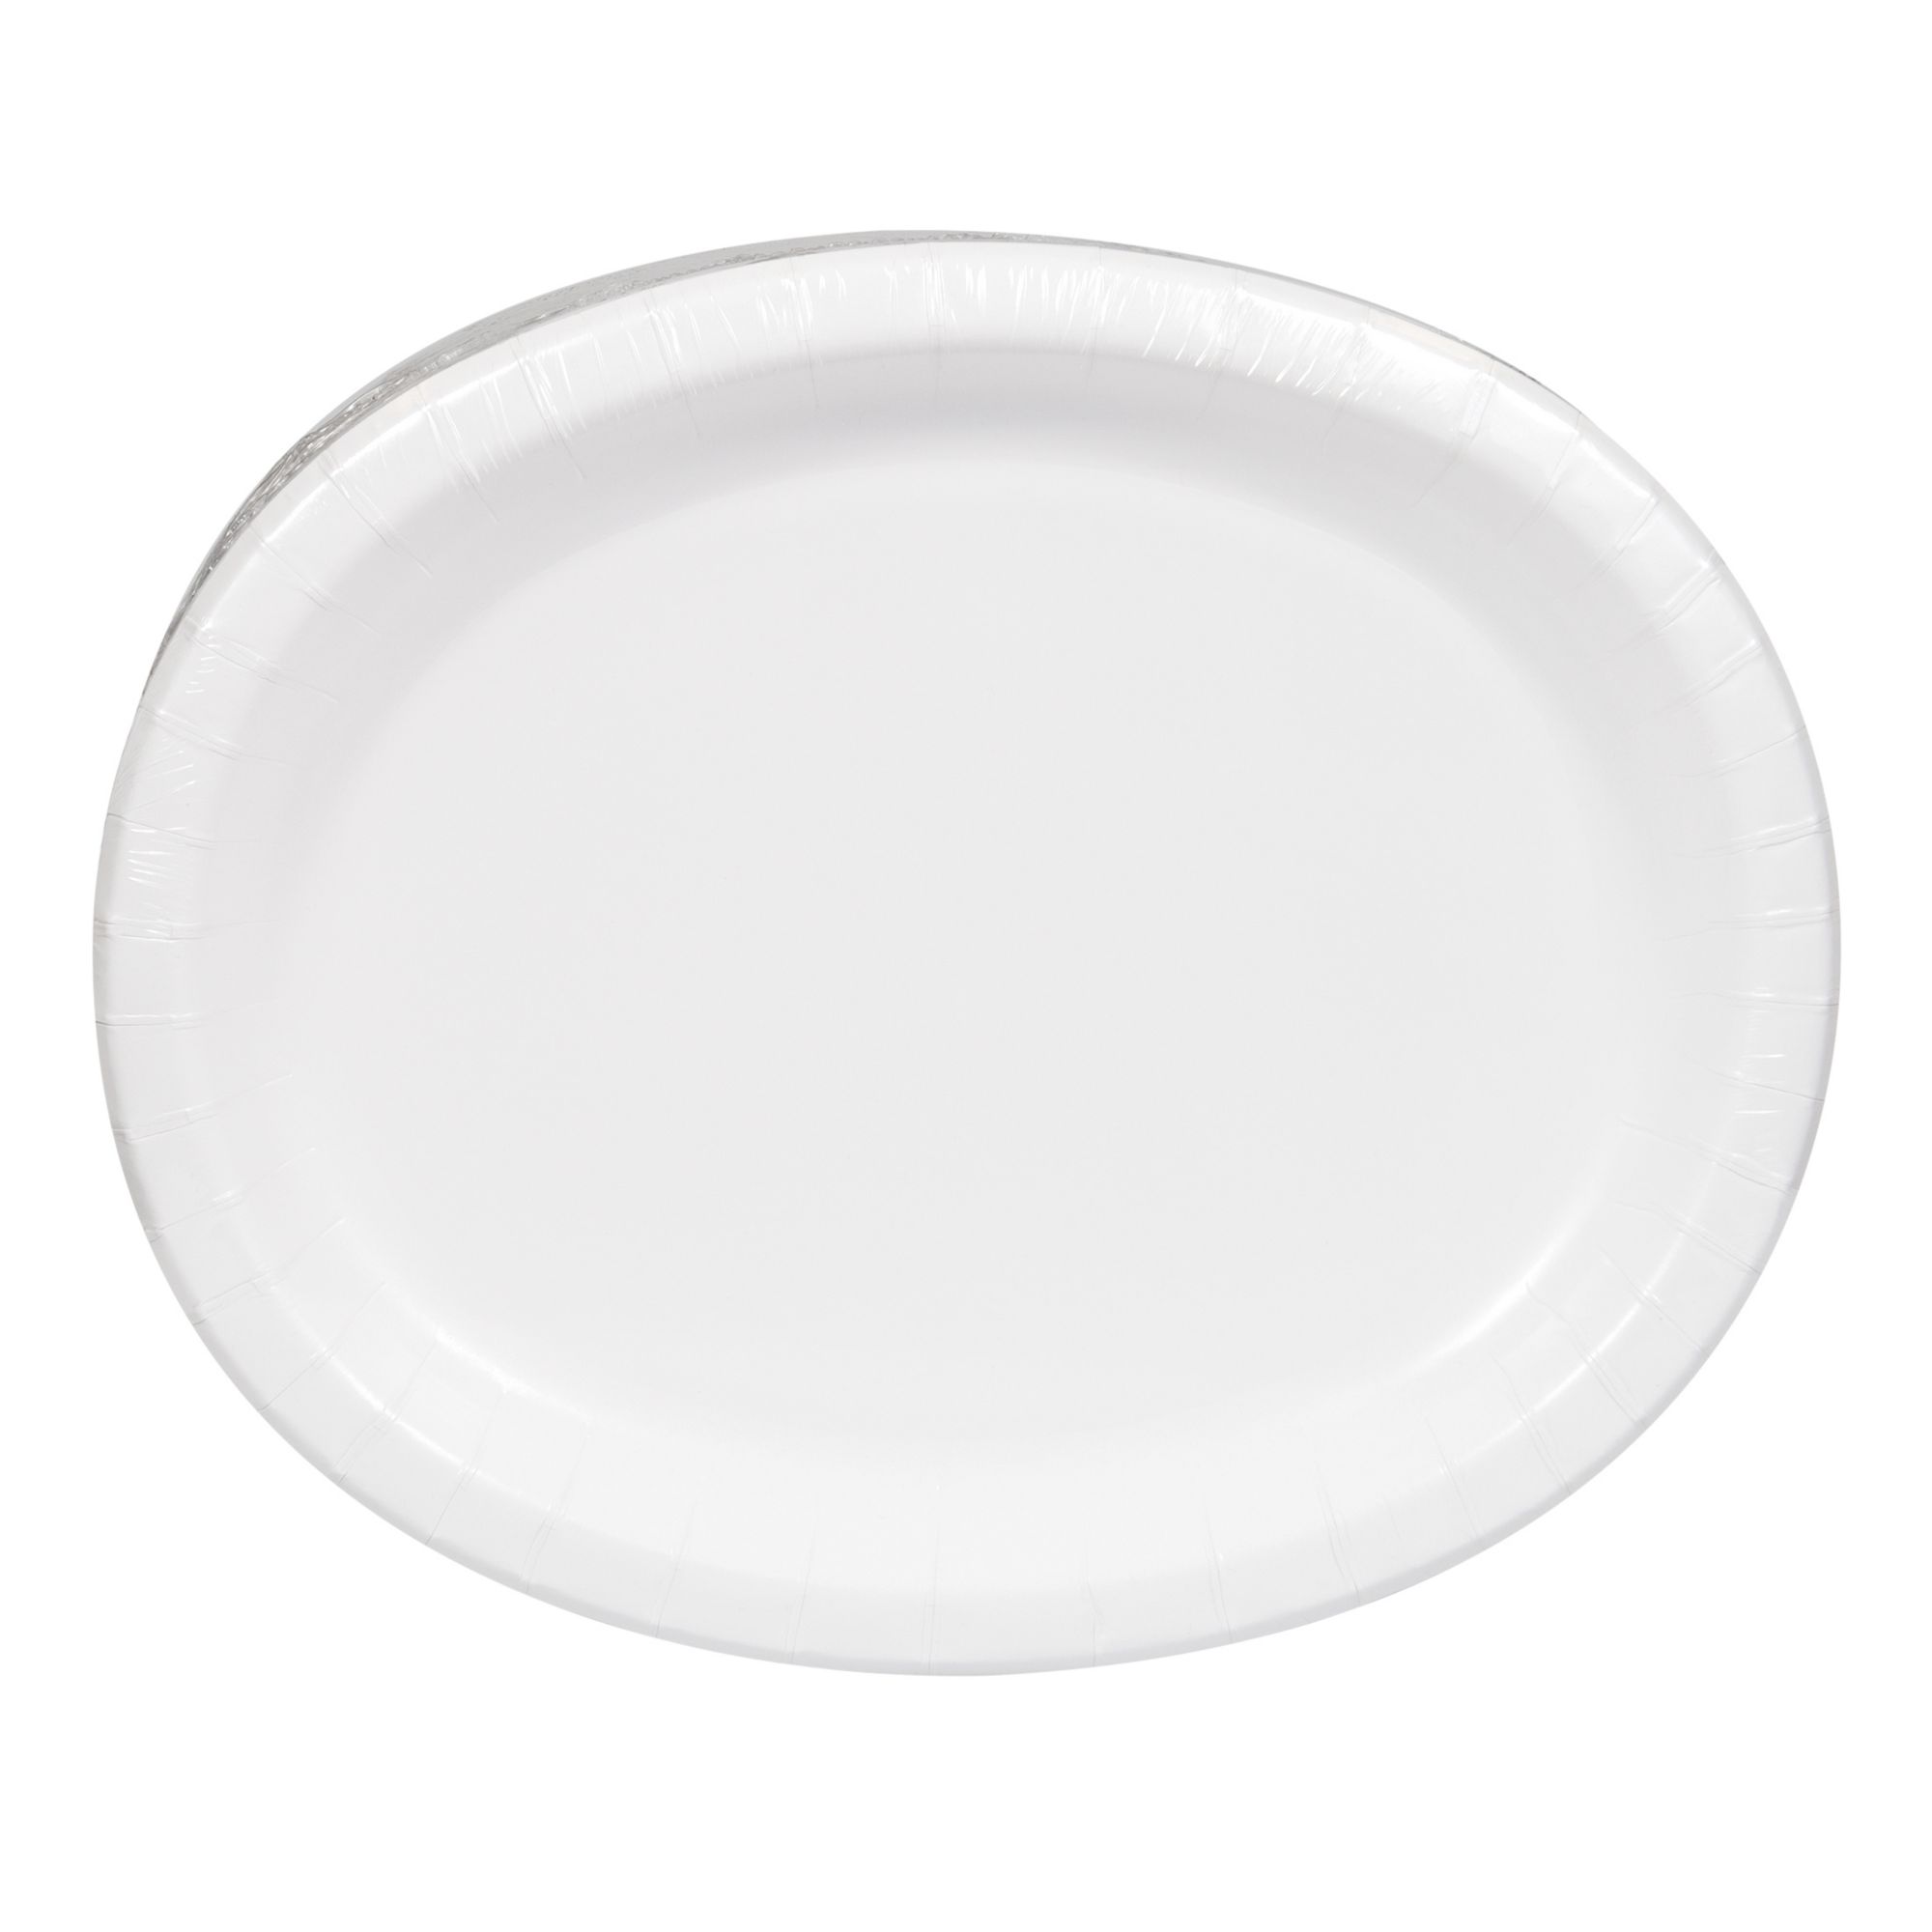 Great Value Large Plates 10 INCH Heavy Duty Premium Party Paper Plates, 150  ct, White